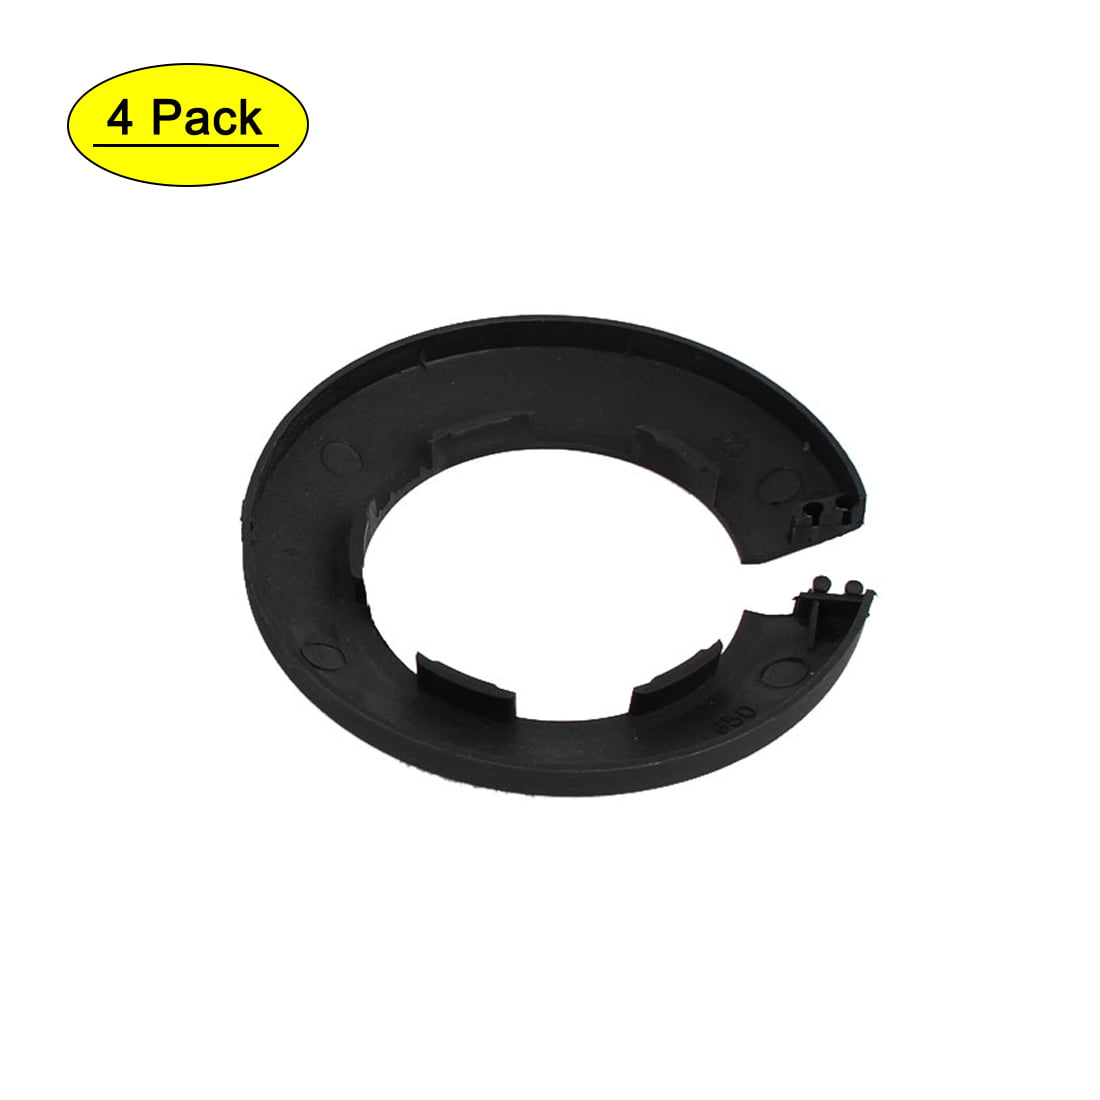 50mm Plastic Wall Flange Radiator Water Pipe Cover  Black 4pcs 